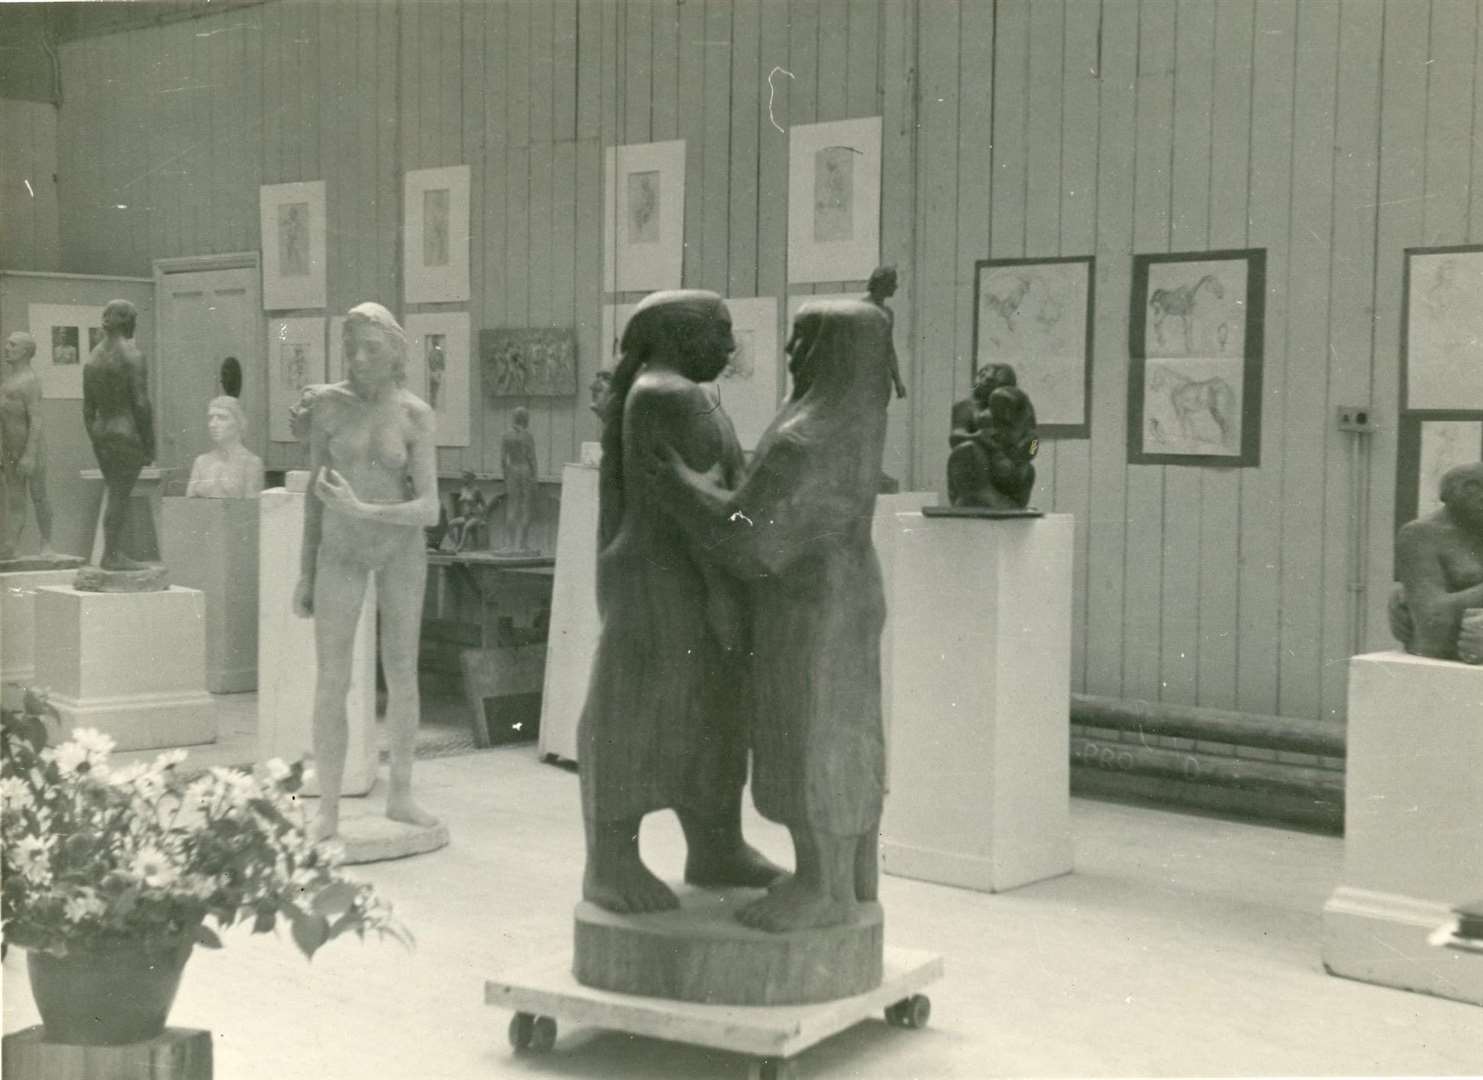 Audrey Jenkins' sculpture on display with other artworks in the 1950s